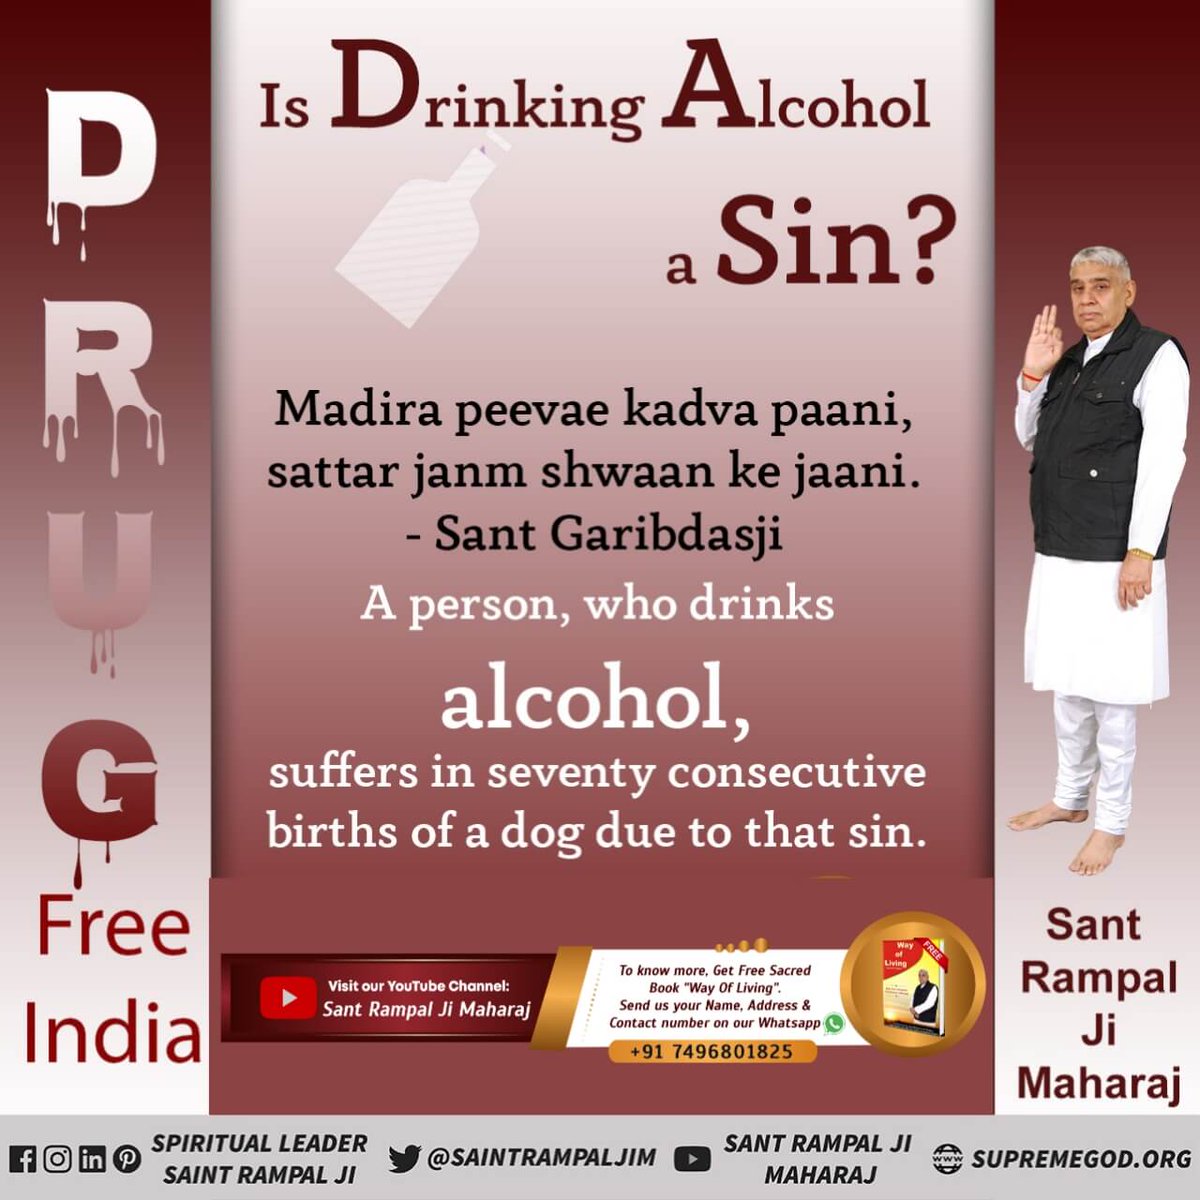 #नशा_एकअभिशापहै_कैसे_मुक्तिहो
Intoxication destroys mental peace 
It is natural those children, whose father consumes Intoxication, to have unrest in their home. The children remains  fearful. 
⤵️⤵️
Visit our YouTube channel SantRampalJiMaharaj